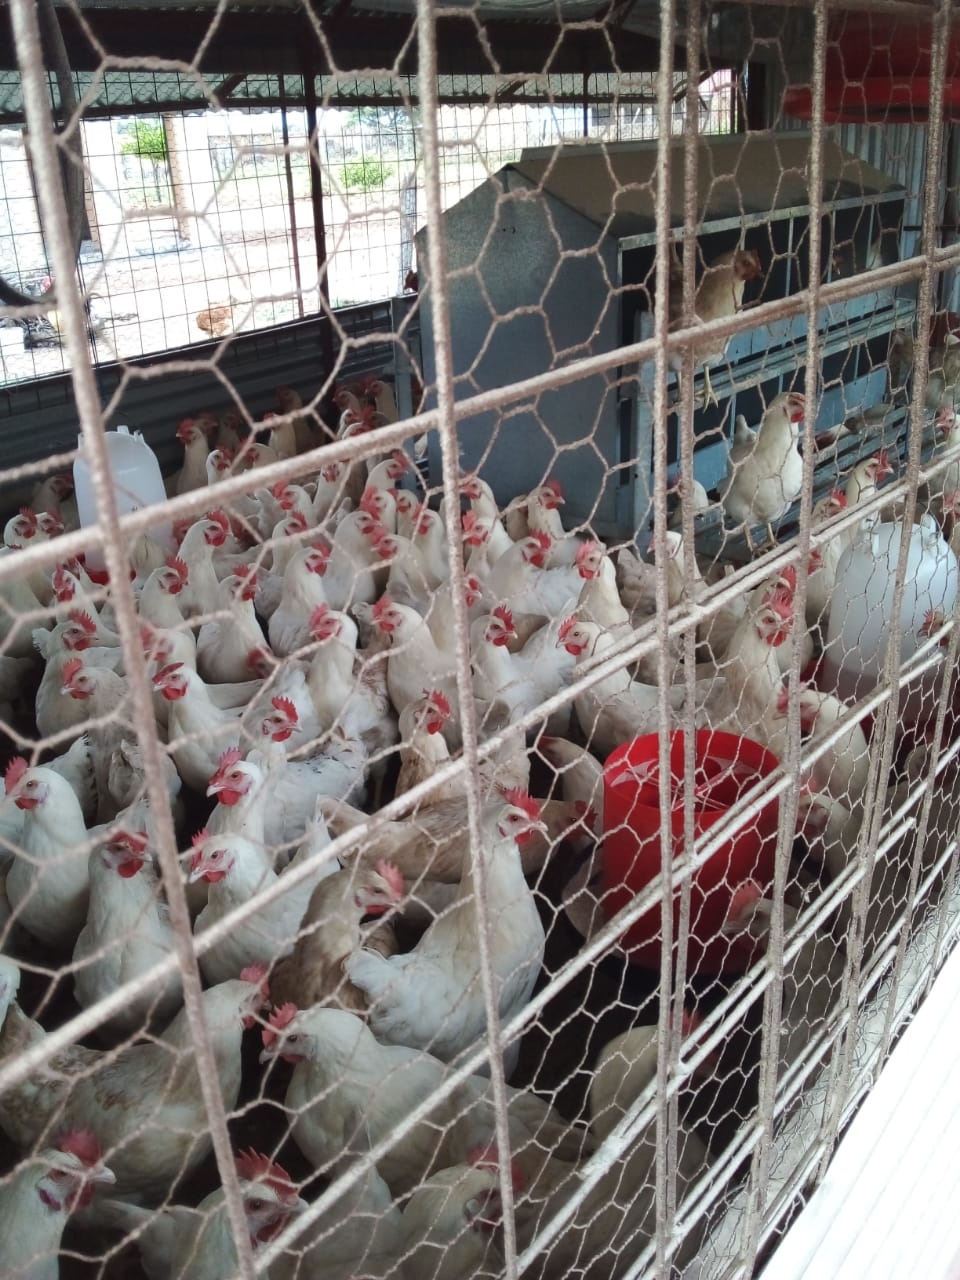 Mashaka Coop Egg Produces eggs for supply and purc